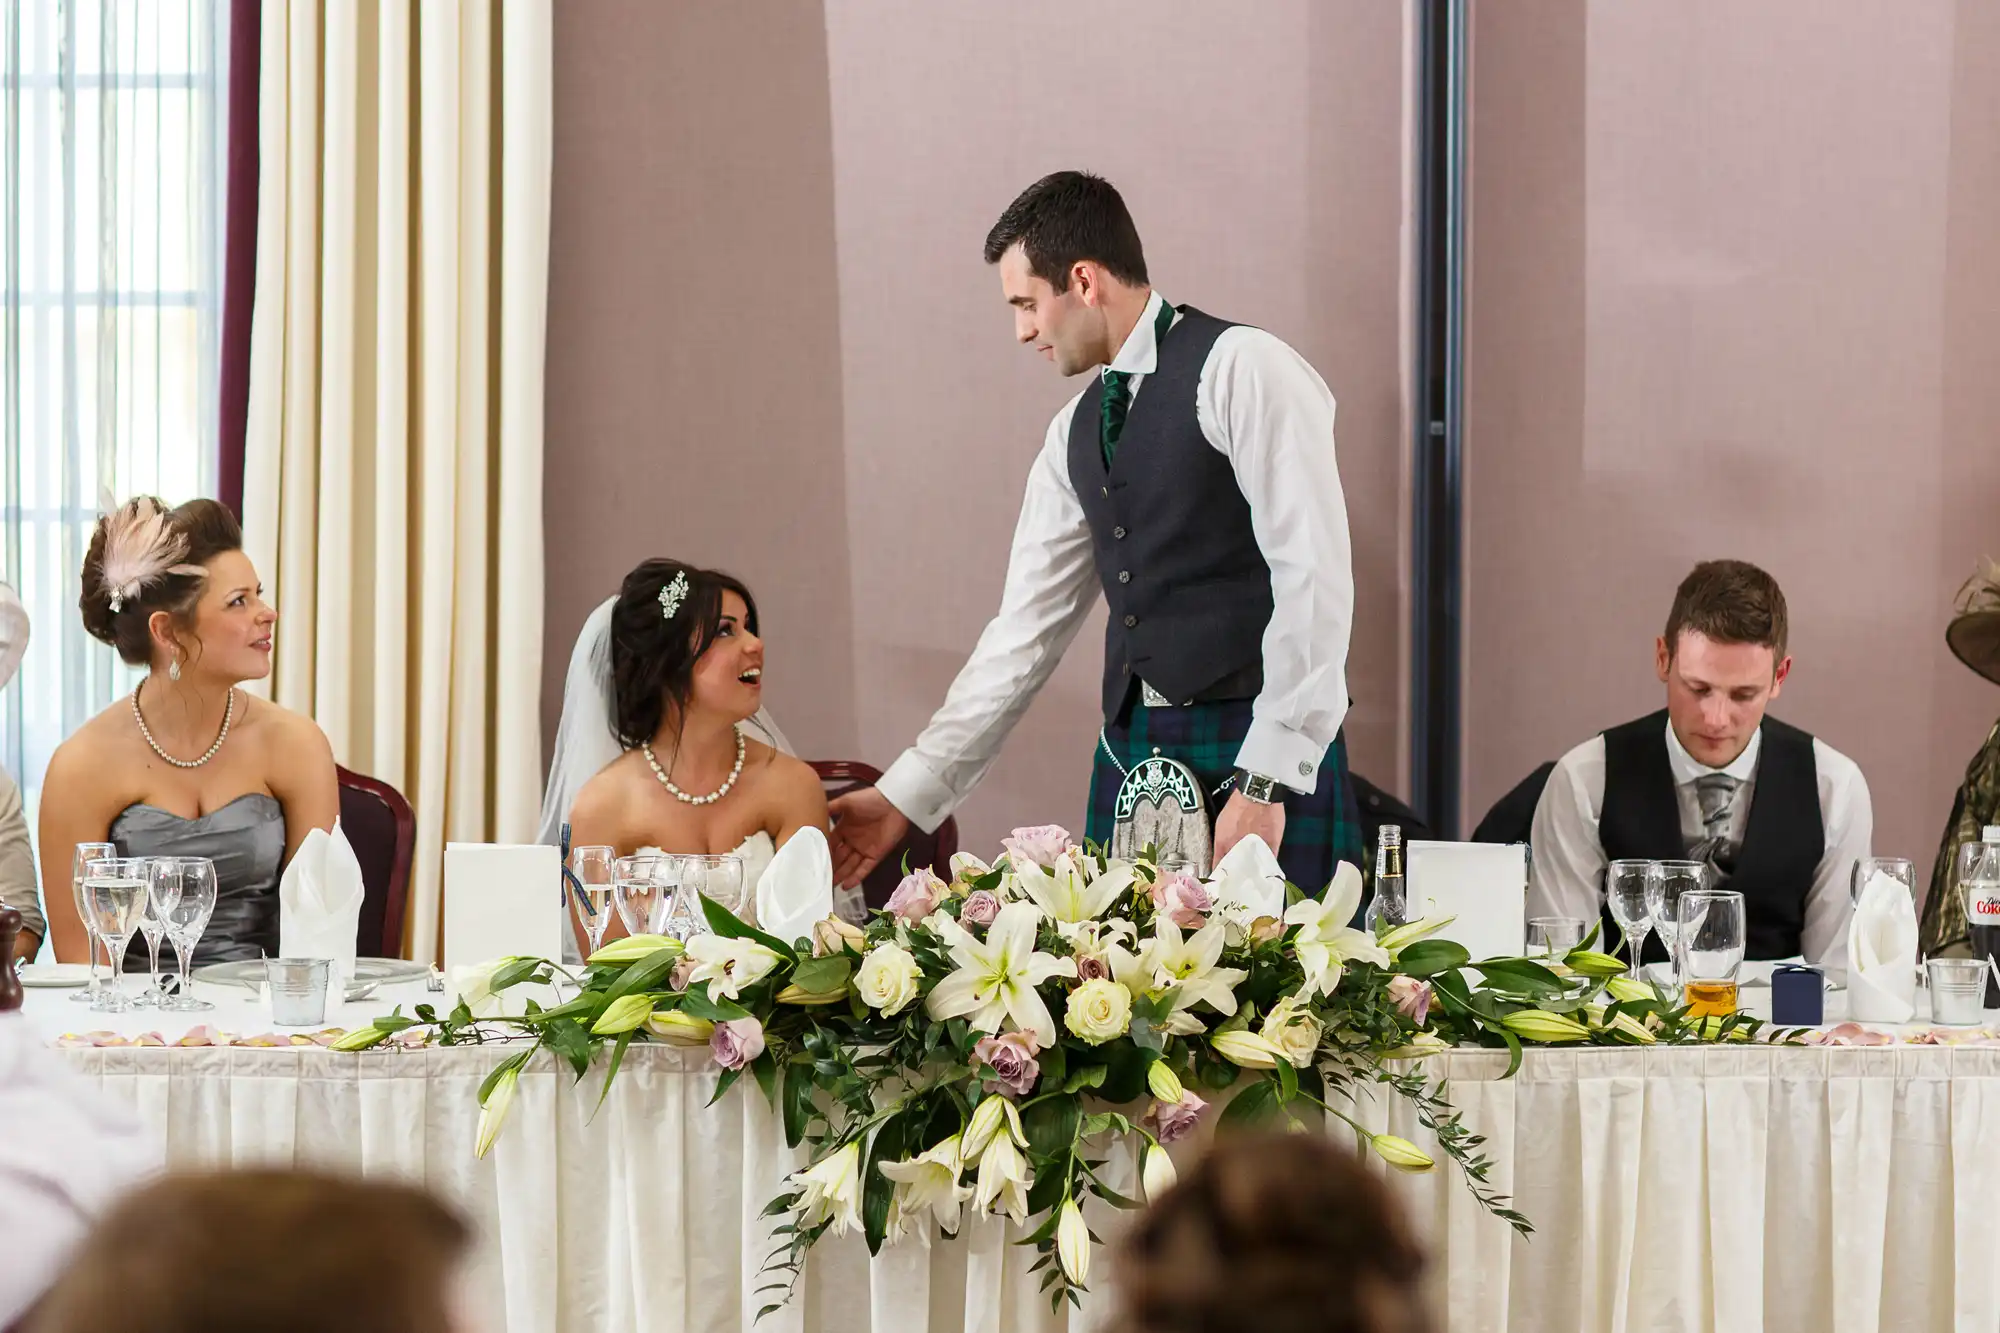 A groom in a kilt holding hands with his bride at a wedding reception table, surrounded by guests and floral decorations.